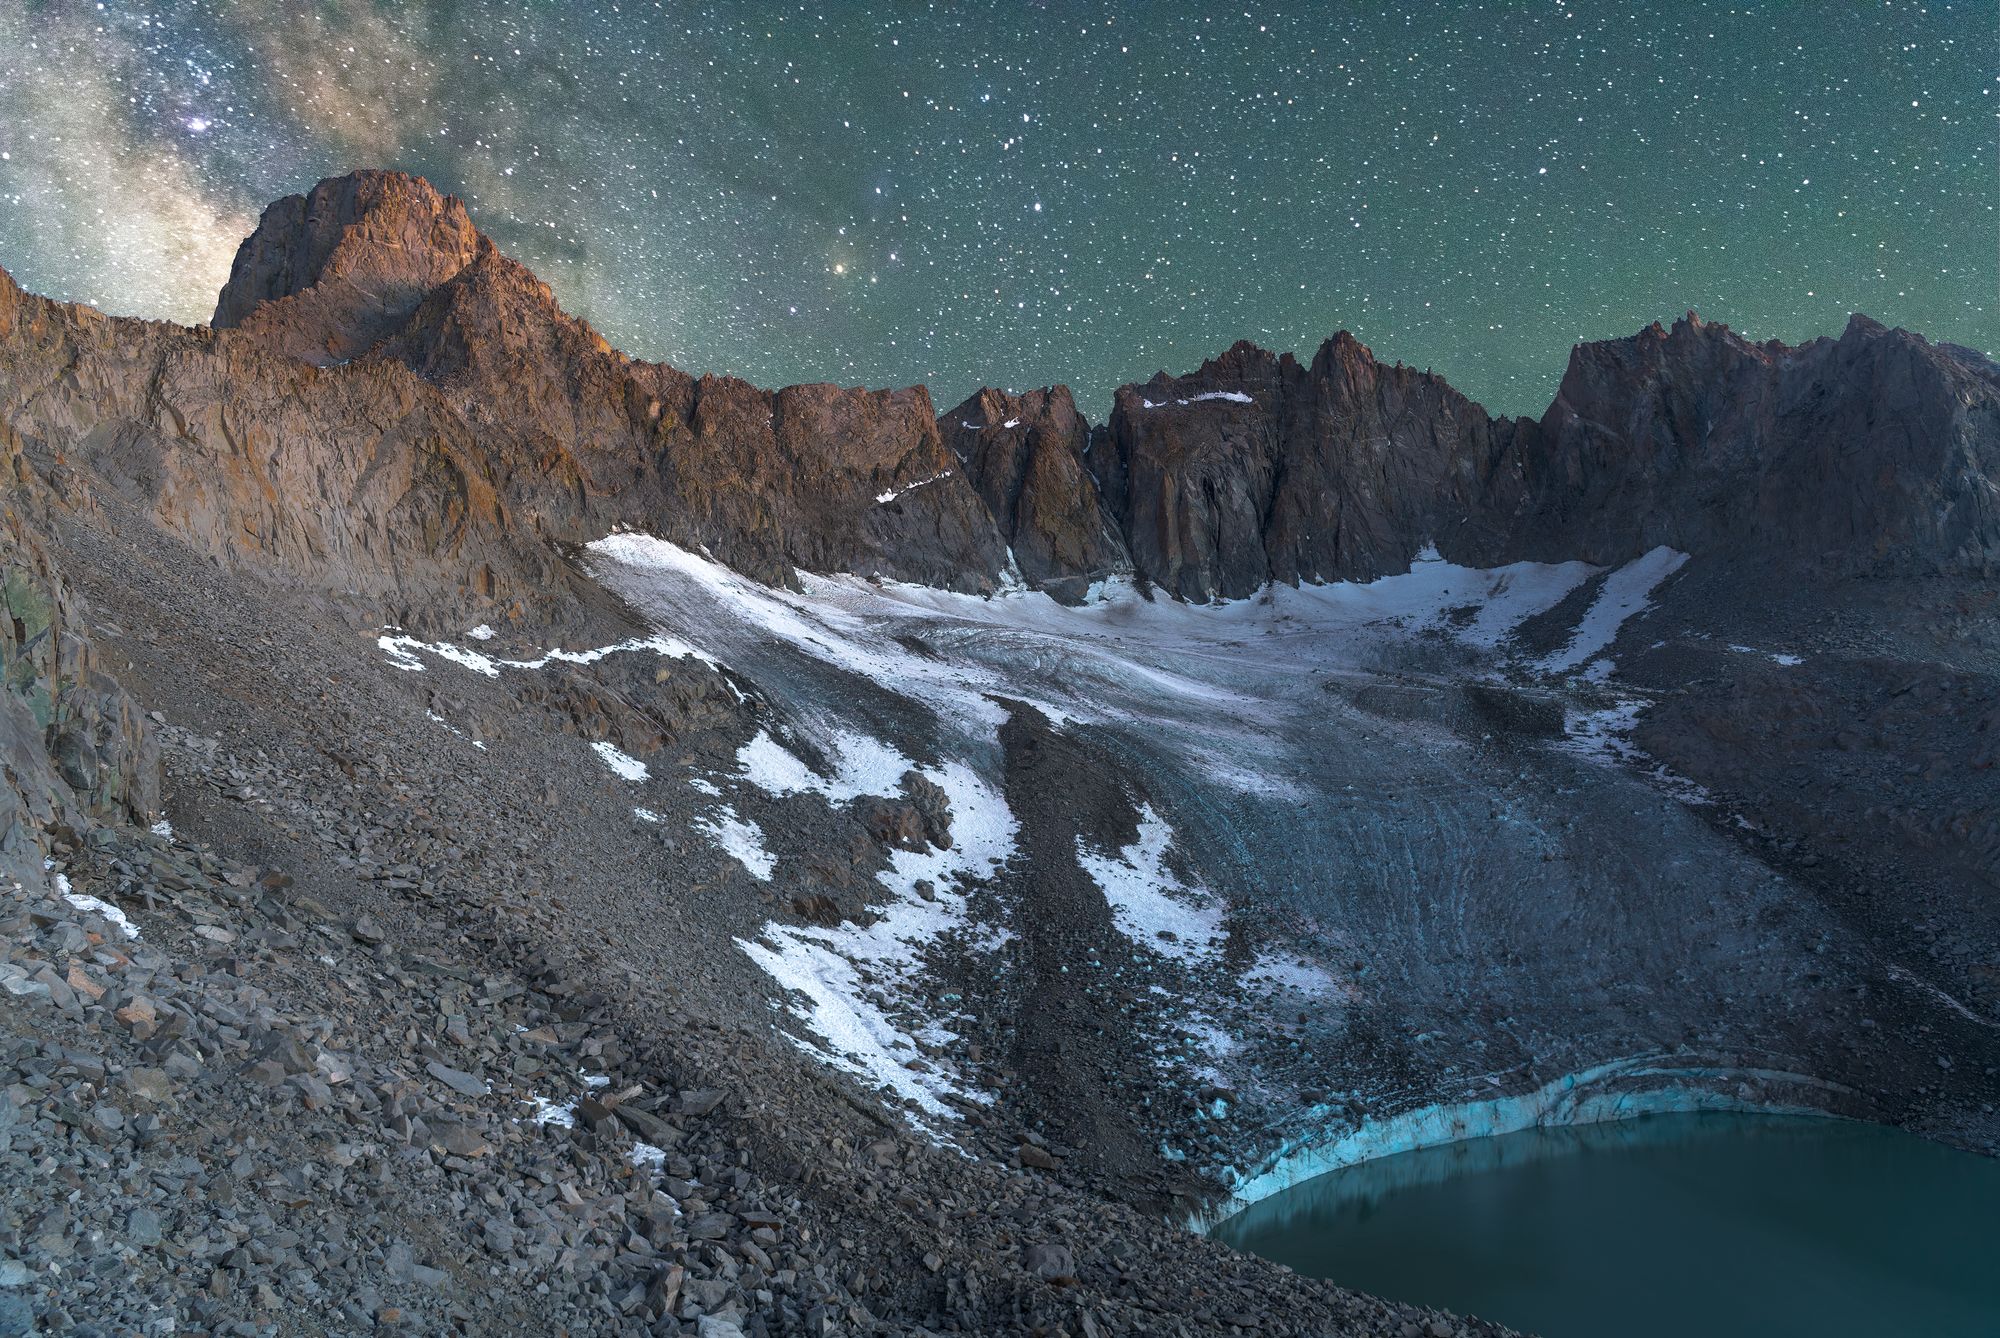 The Palisade Traverse and Glacier under the stars (Sill to the left).